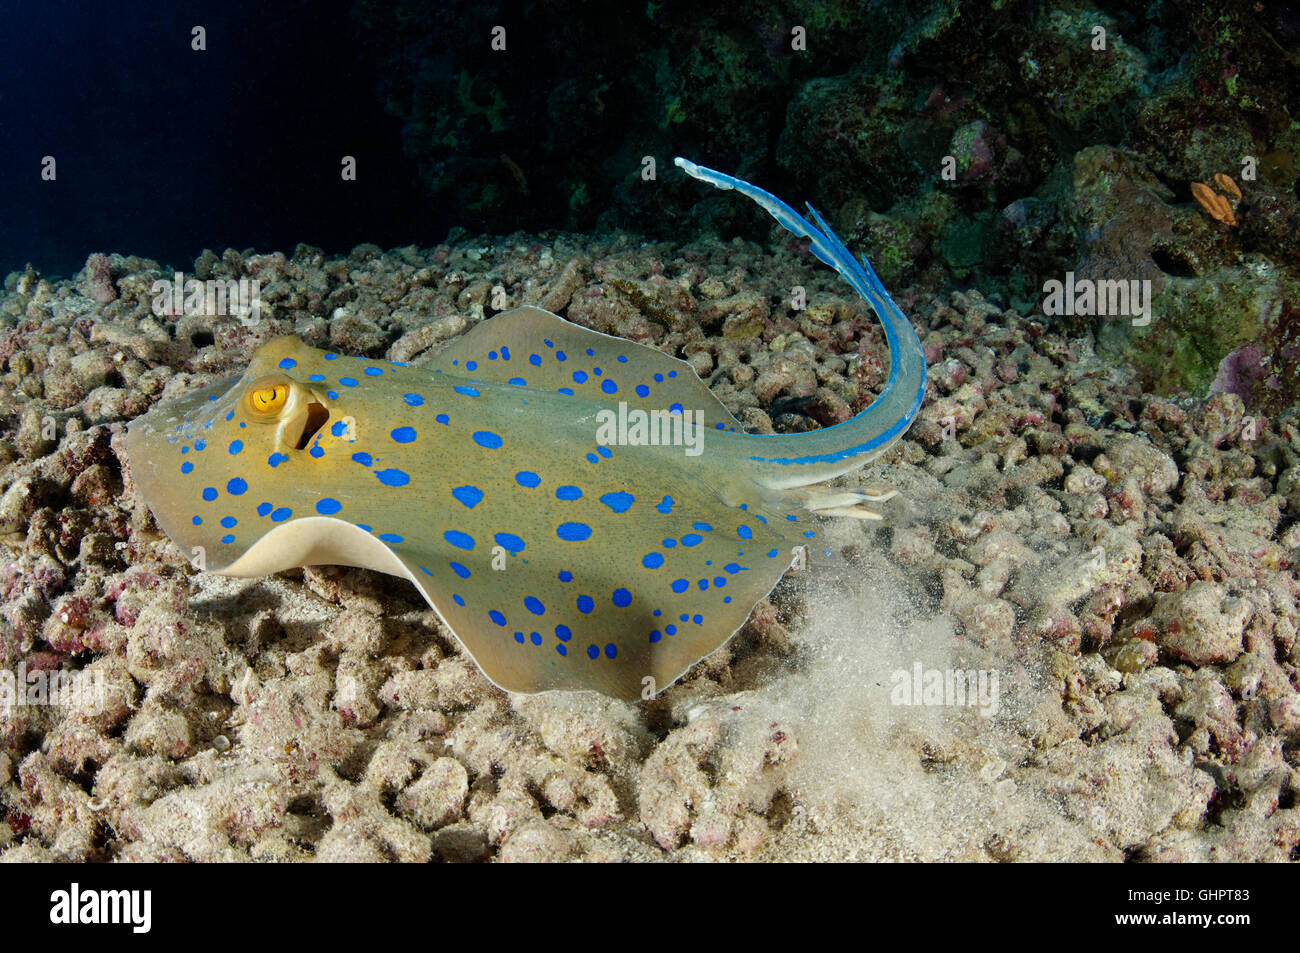 Taeniura lymma, bluespotted stingray ribbontail, ray, Red Sea, Egypt, Africa Banque D'Images